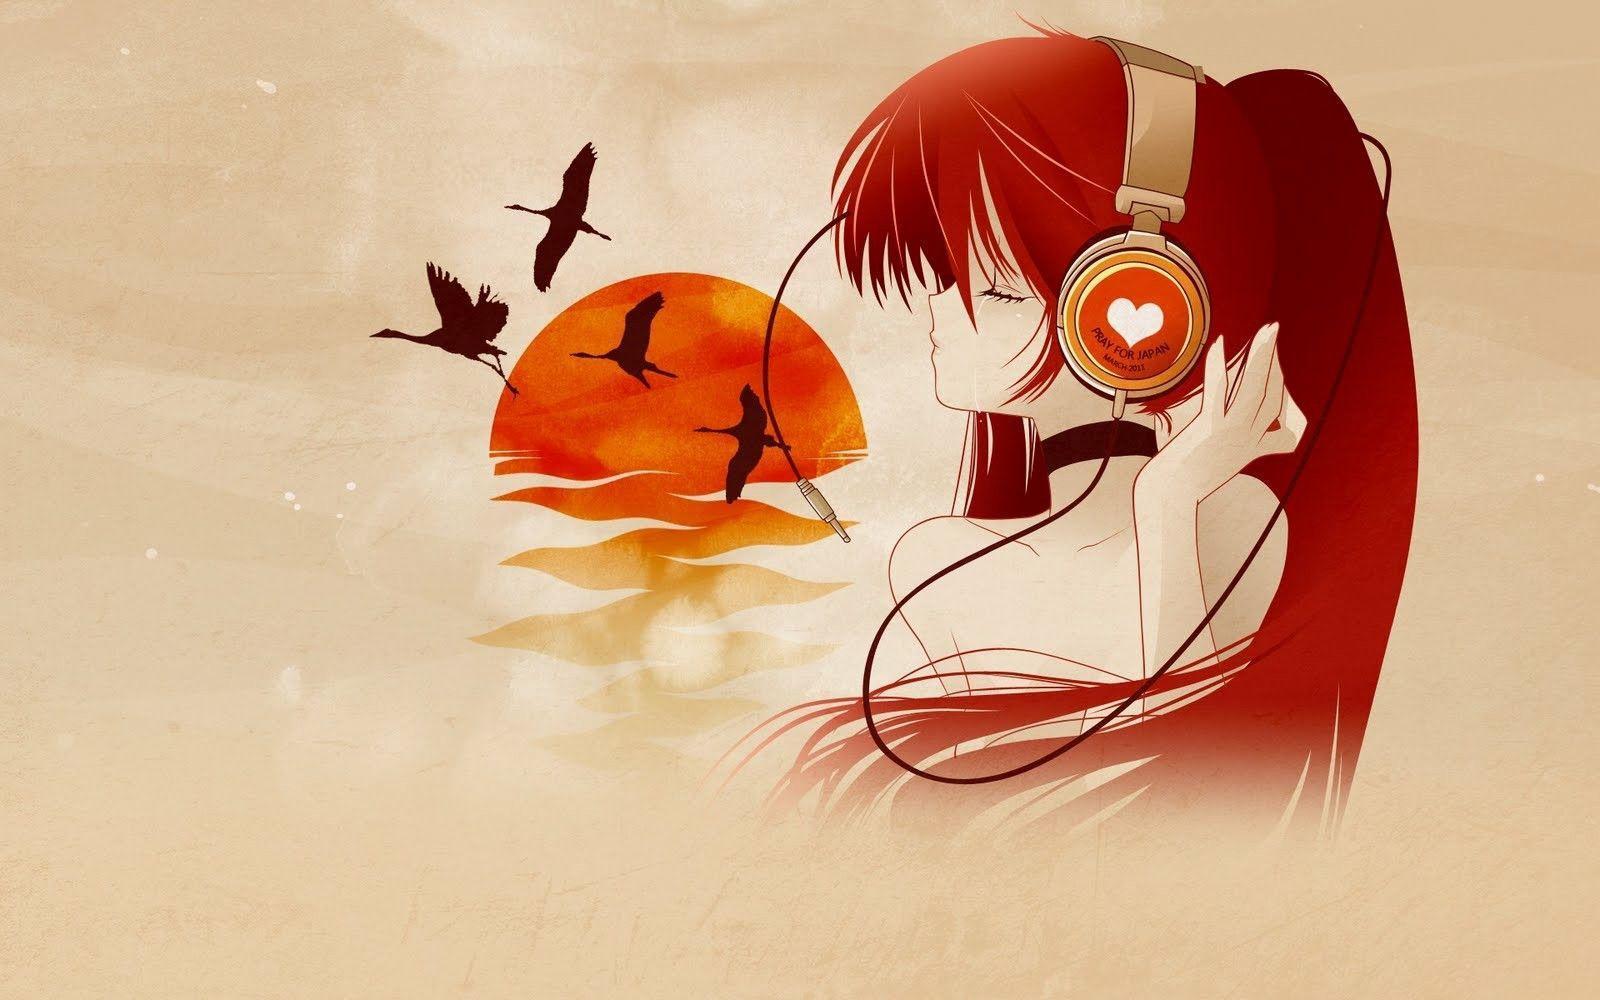 GD95: I Love House Music Wallpaper, Awesome I Love House Music